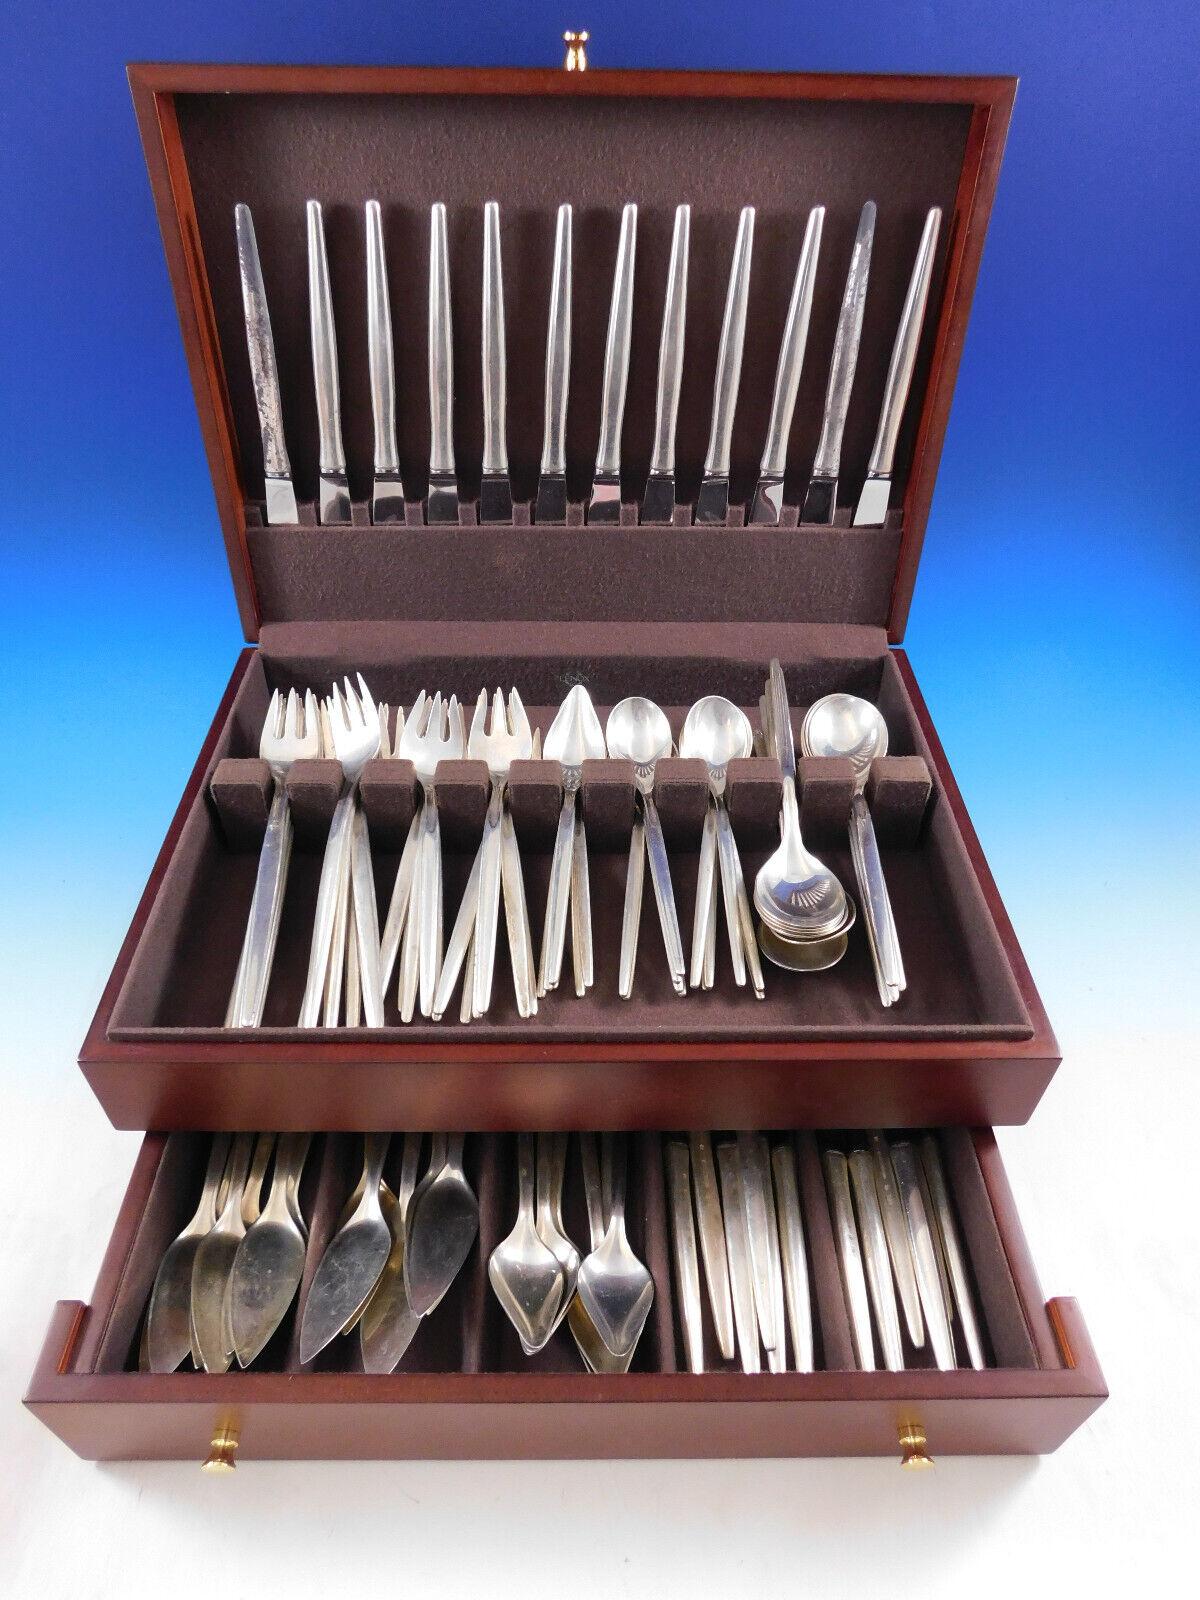 Stunning Scandinavian Modern Tulip by A. Michelsen sterling silver Flatware set with modern elongated handles, 96 pieces. This set includes:

12 Knives, 8 1/2